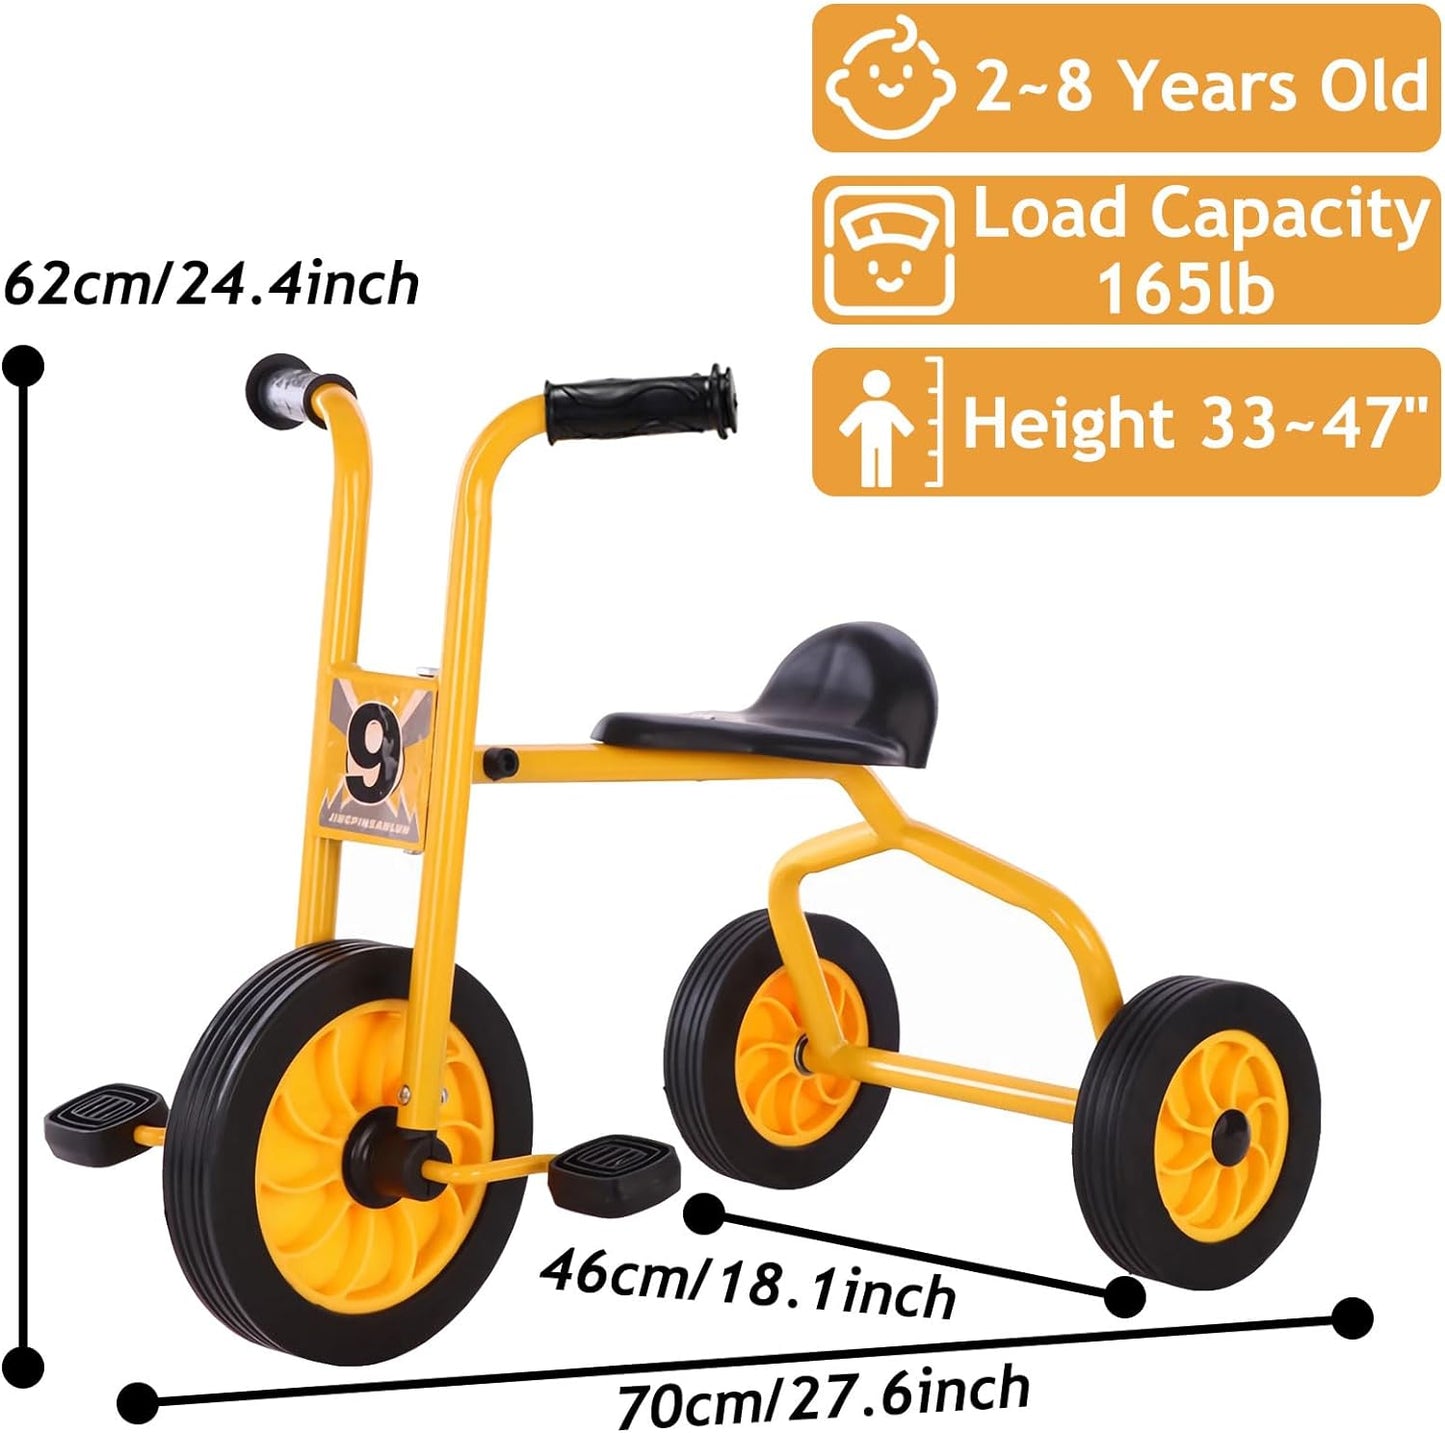 Kids Tricycle for Rider Age 2+,Kids Trike with Inflation-Free Wheels,Preschool Daycare Kids Pedal Bike,Kids Outdoor Play Equipment,Trikes for Toddlers,Carbon Steel Frame